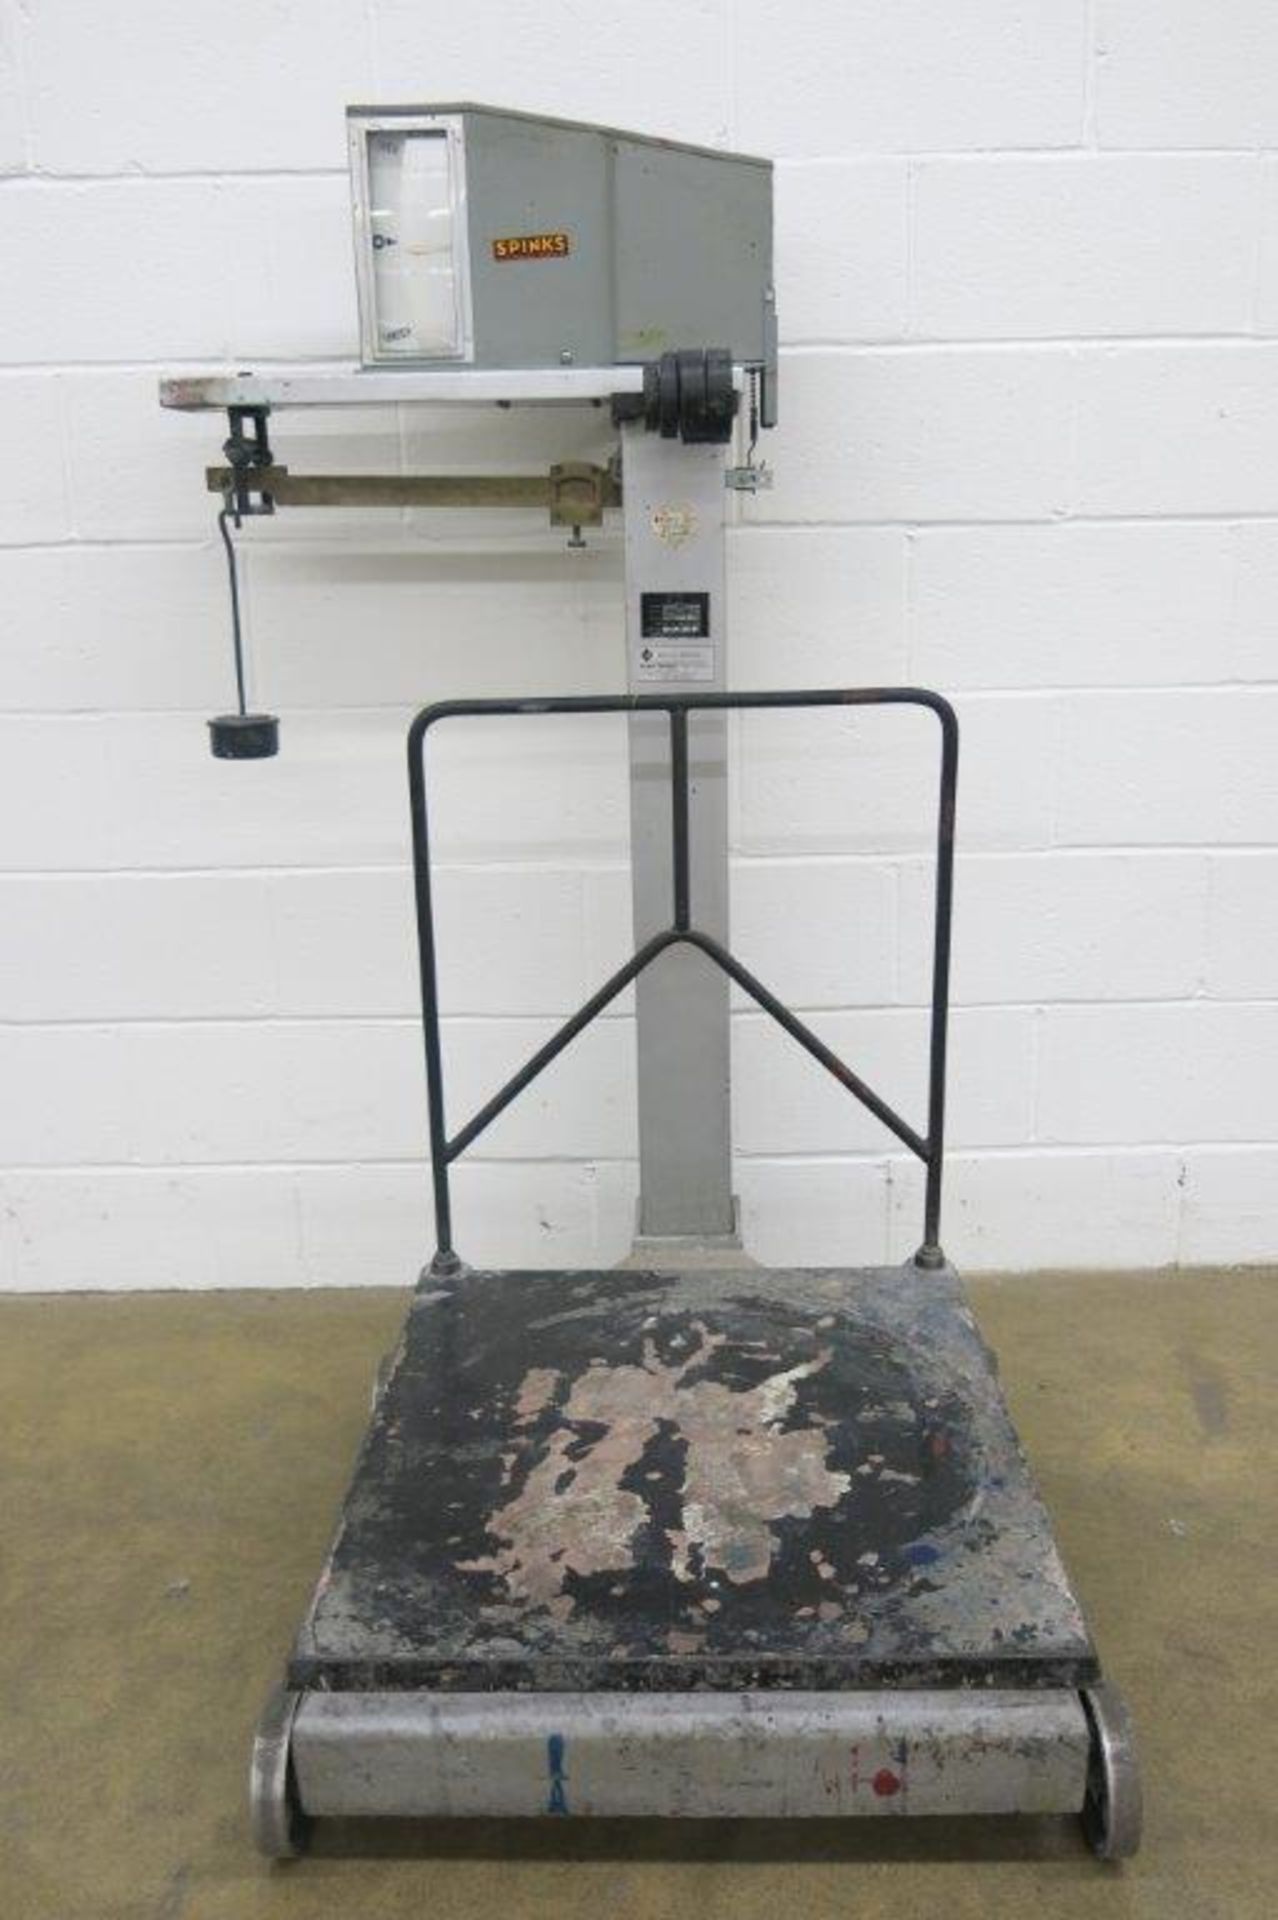 SPINKS SCALE CO, SP903, 1200 LBS., SCALE, S/N 166154